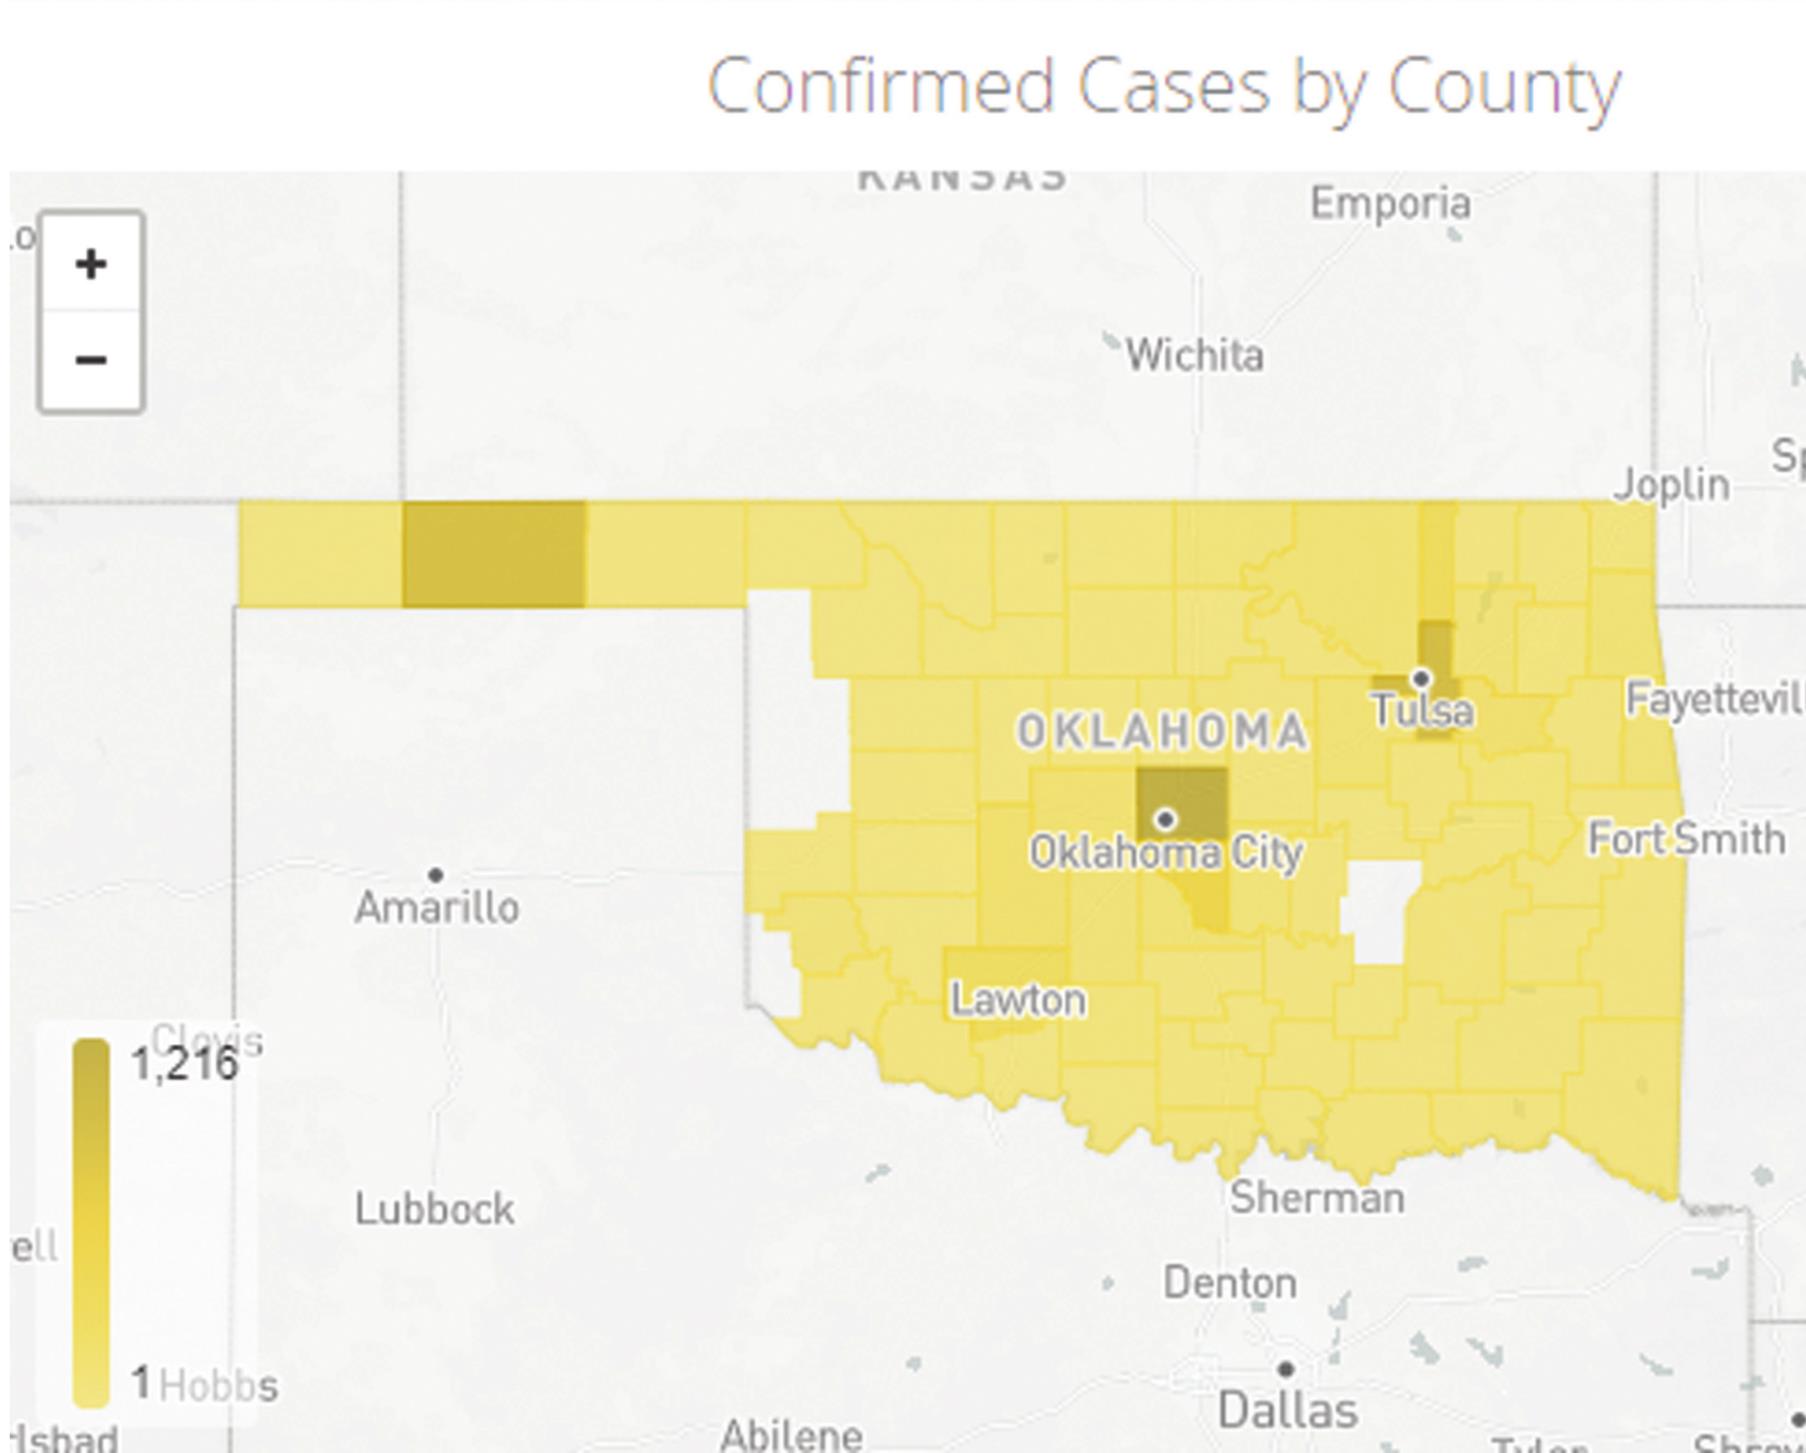 At left, this map shows the number of COVID-19 cases by county. The three darkest counties are Oklahoma County, with 1,216 cases, Tulsa County, with 935 cases, and Texas County, with 890 cases. Provided